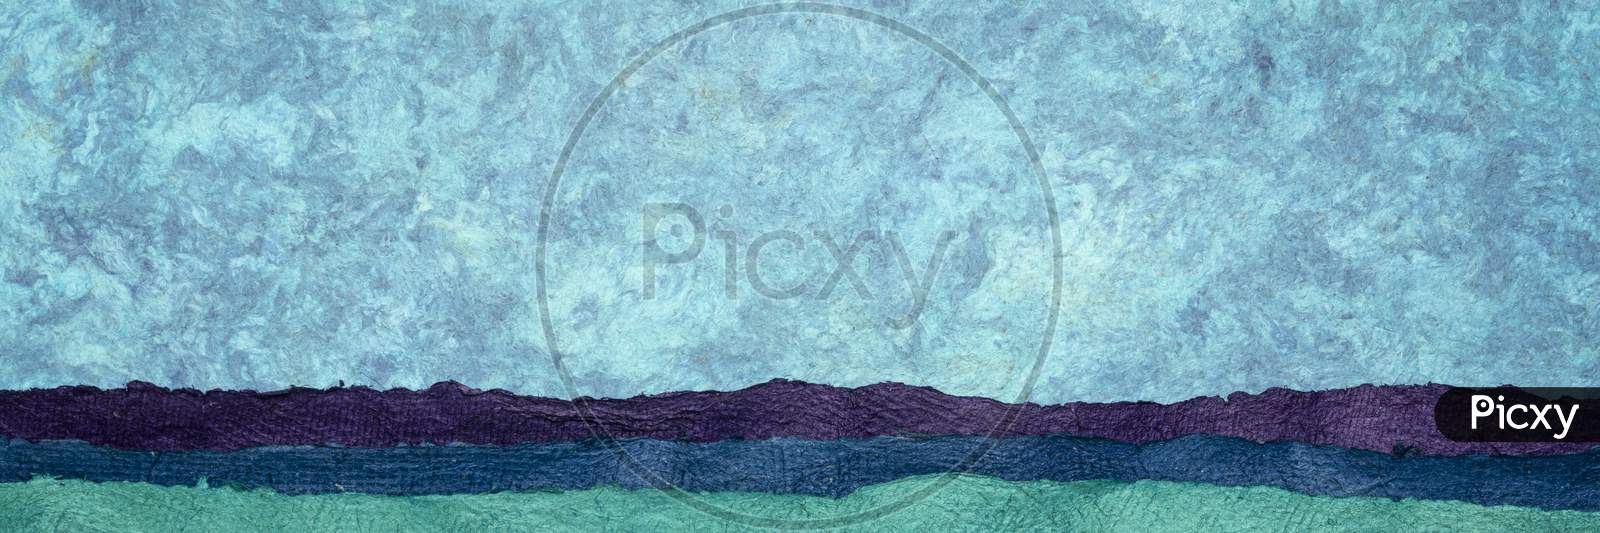 Sky And Sea Panorama - Abstract Landscape Created With Sheets Of Textured Colorful Handmade Paper